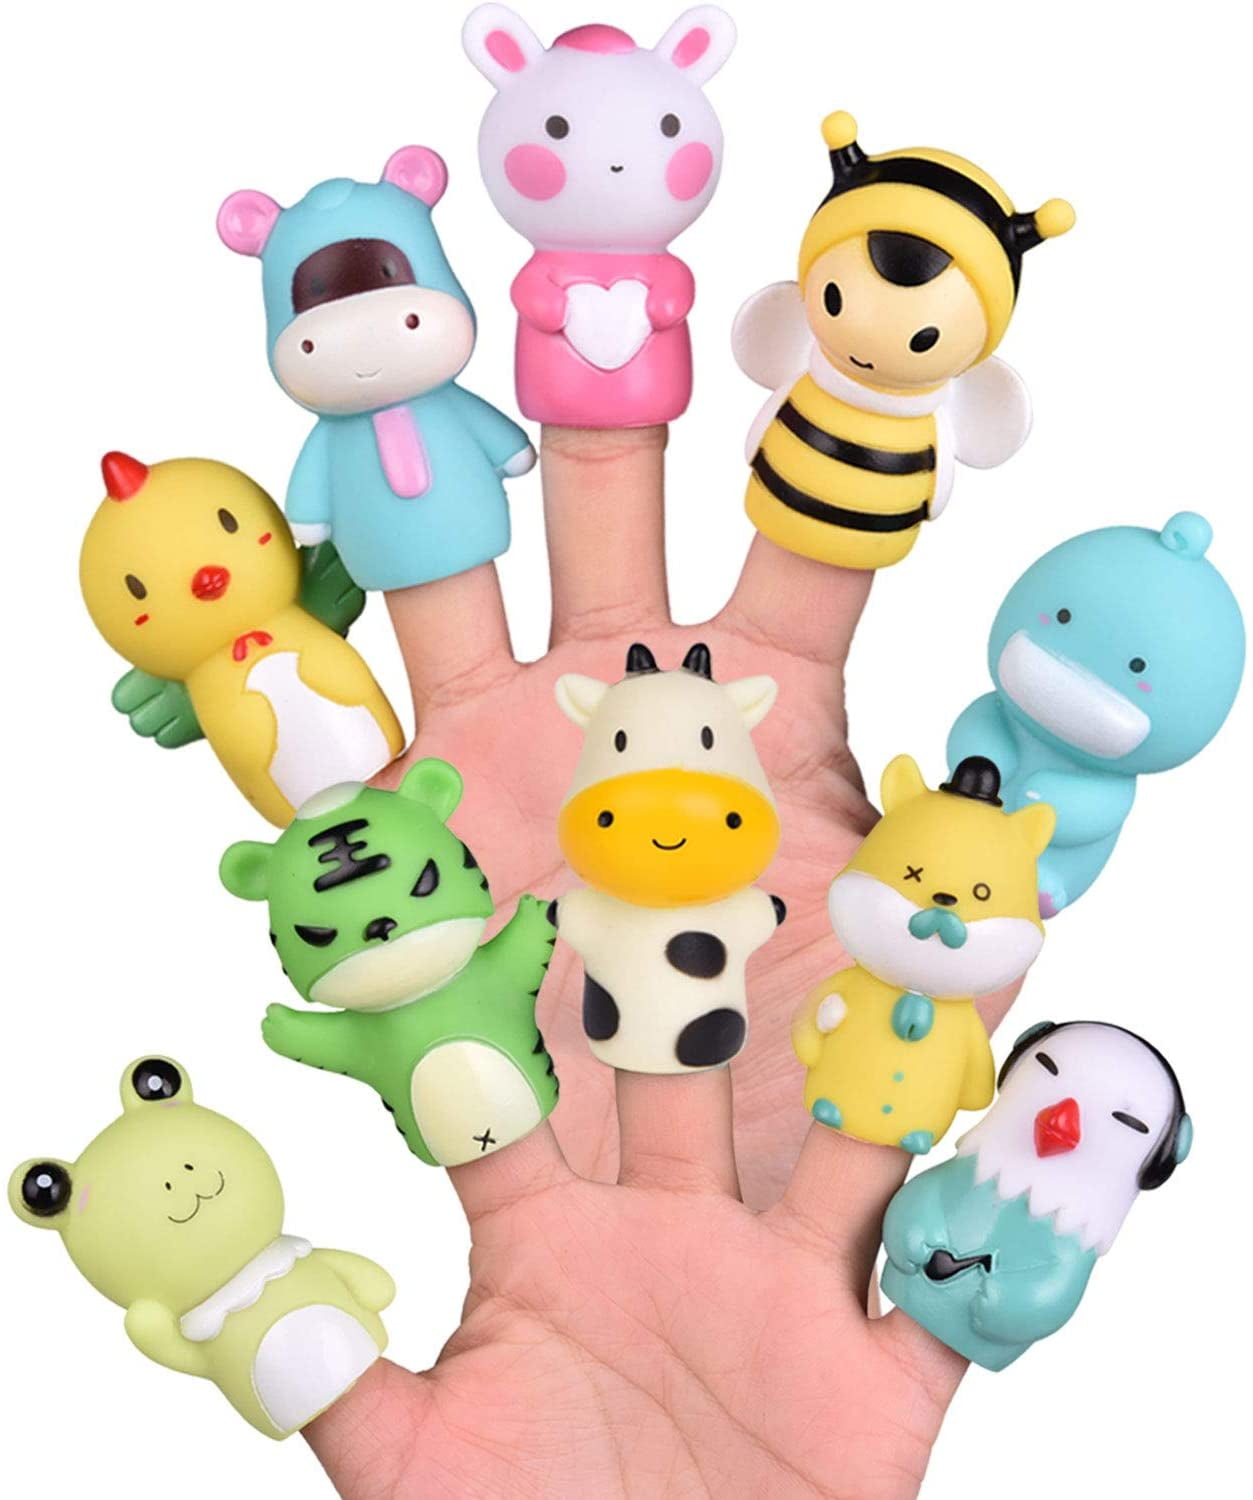 Easter Theme Party Favor 10 Pieces Easter Eggs Filled with Finger Puppets Easter Eggs Hunt,Kids Plush Animal Finger Puppets Set in Plastic Eggs 